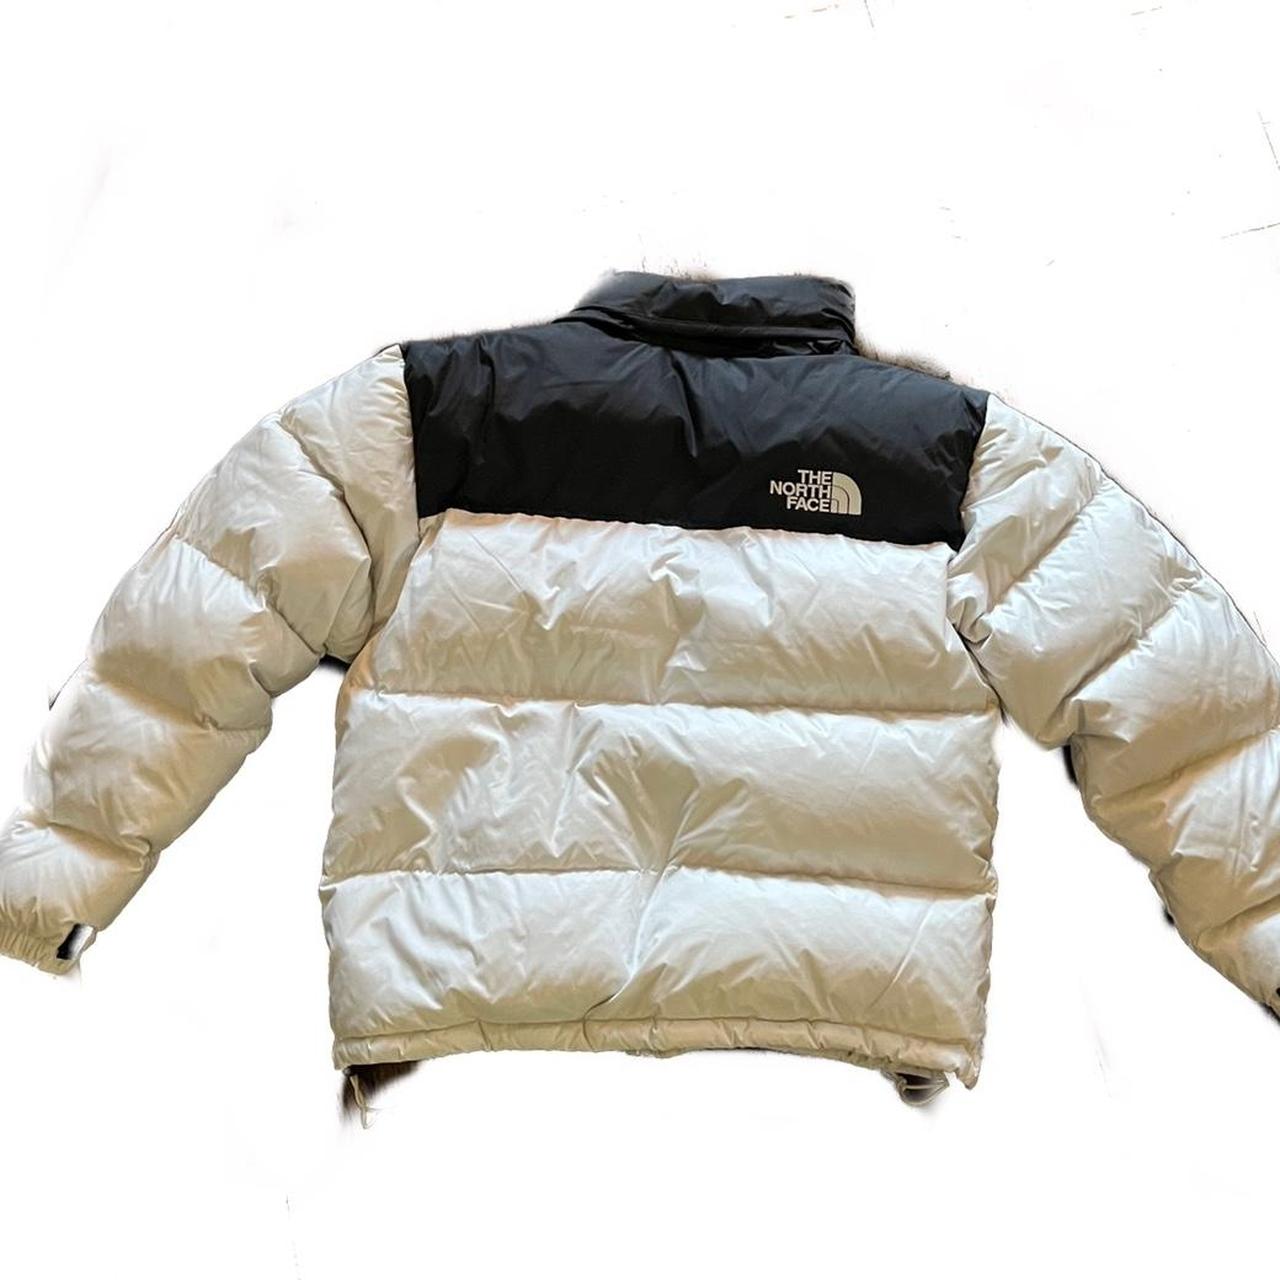 The North Face White 700 Puffer Jacket - Depop